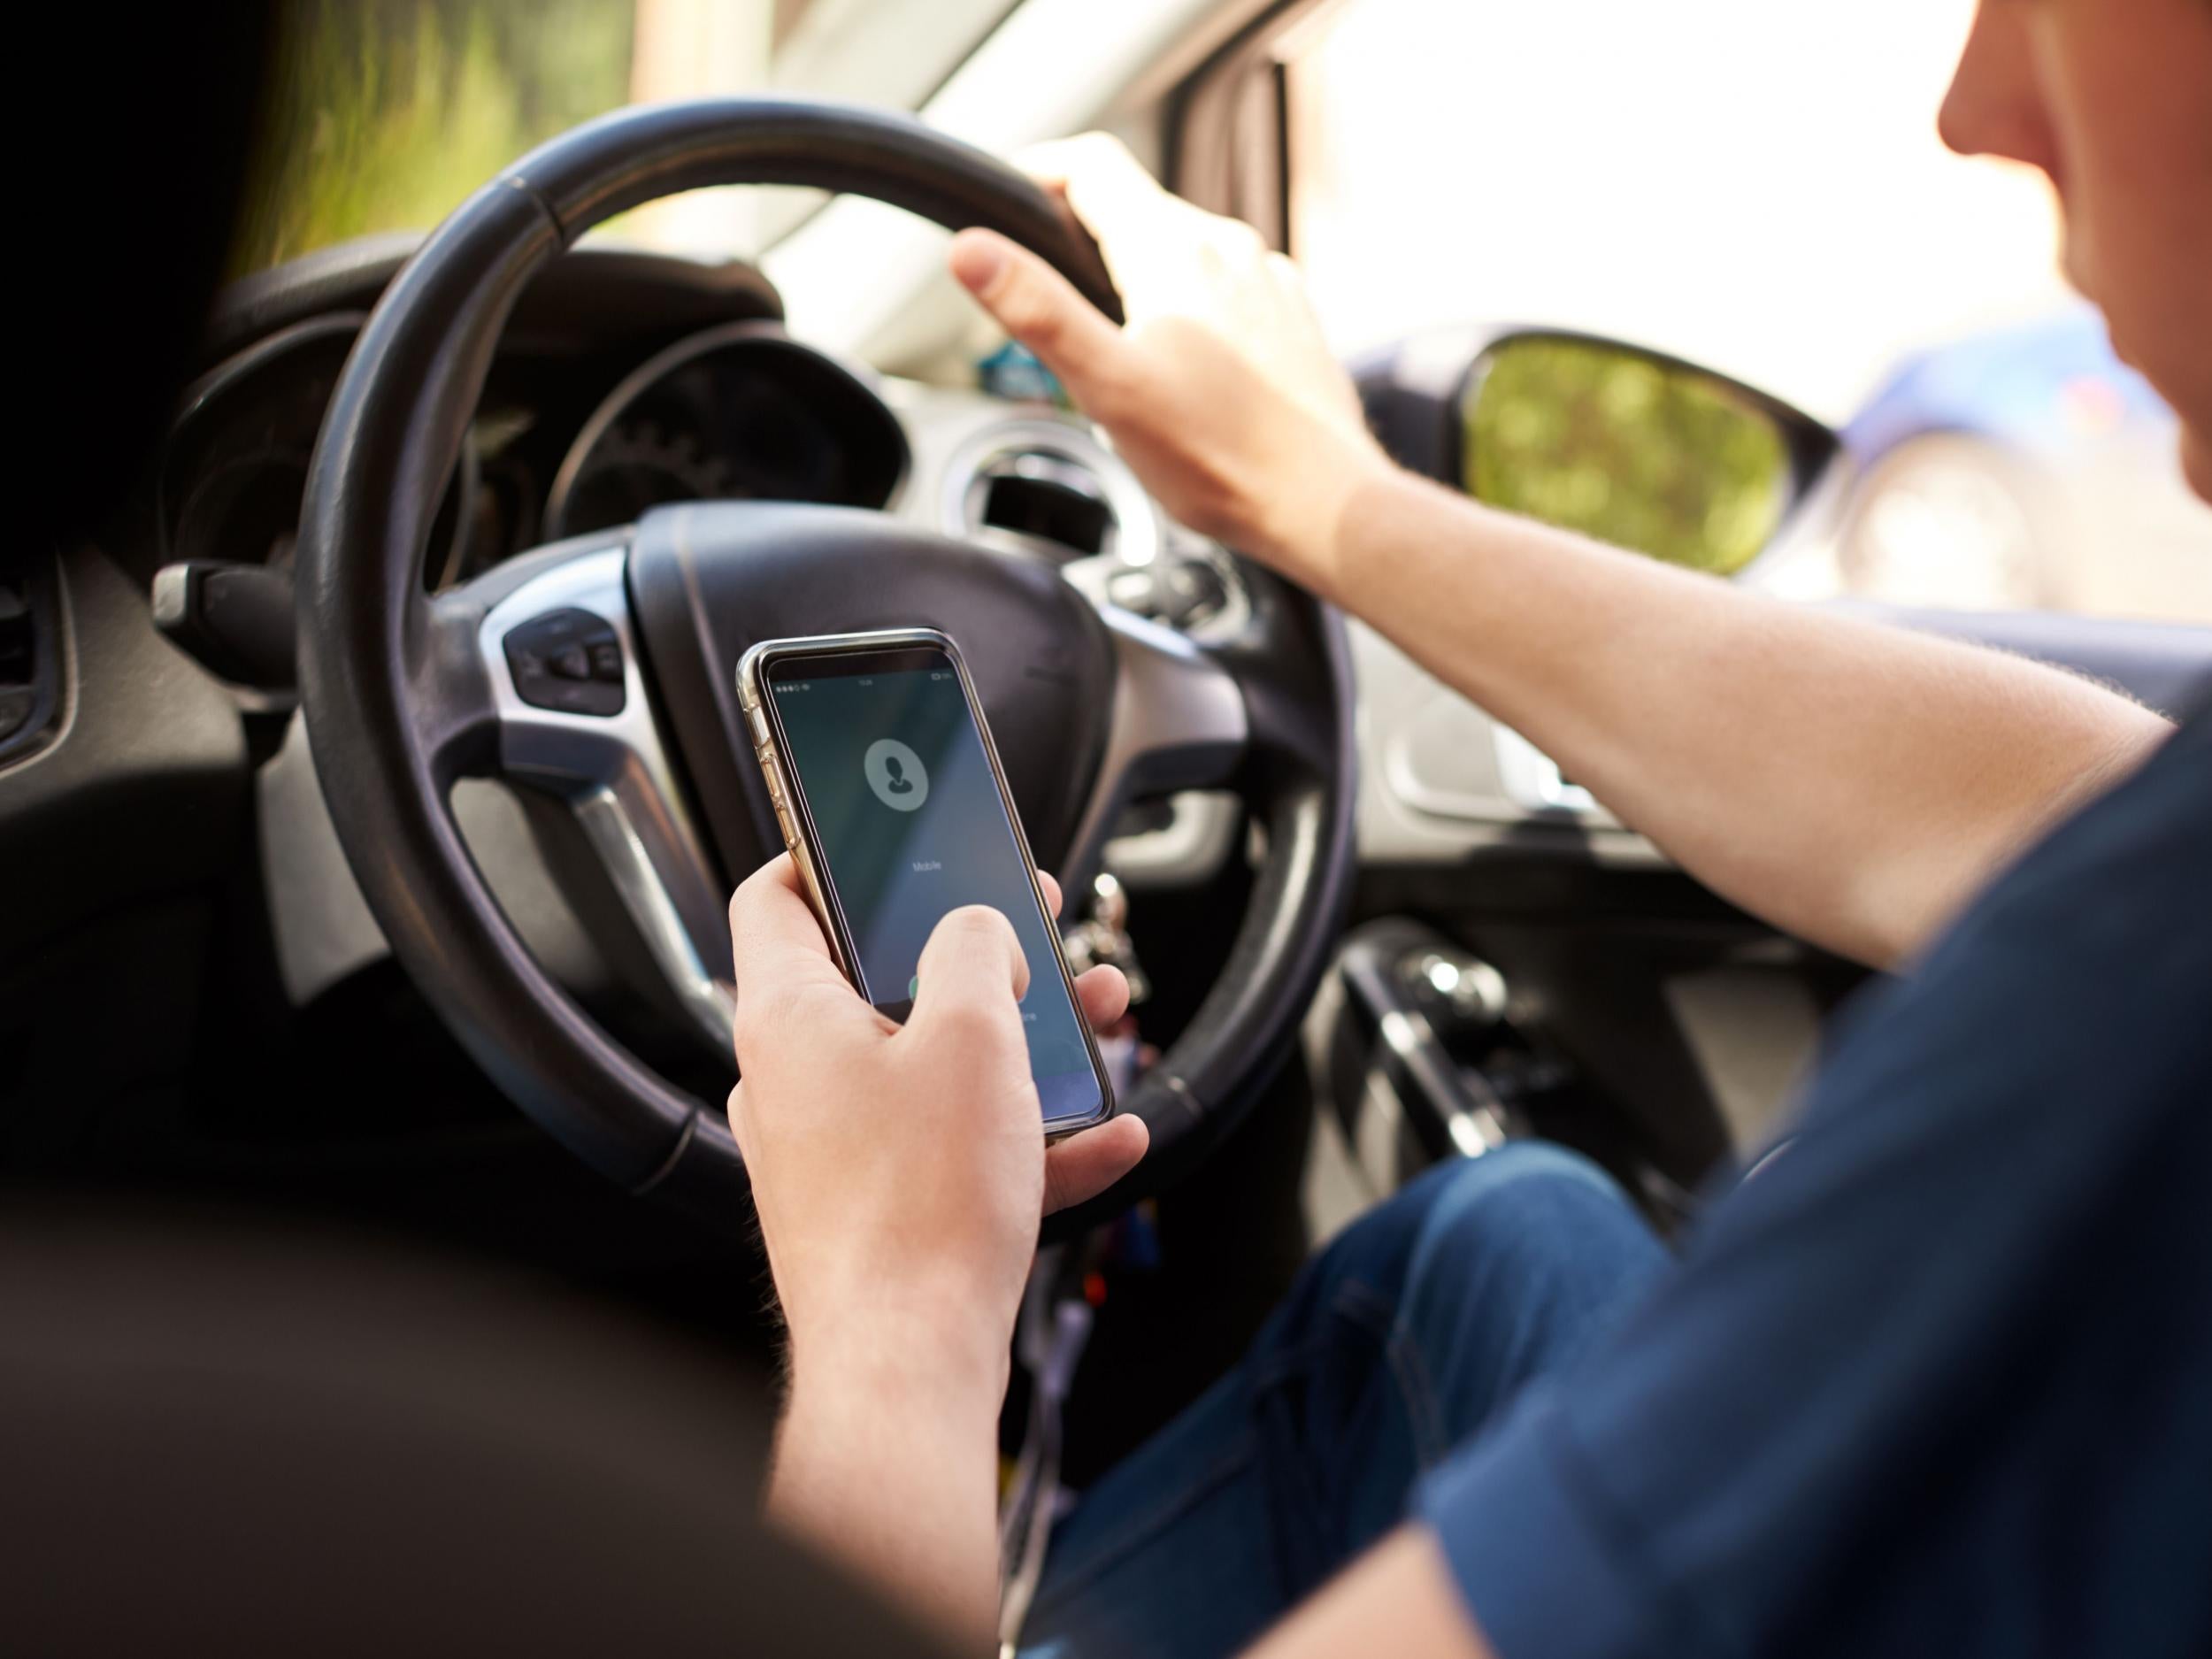 Nearly a third of drivers confessed to checking their mobile phone when behind the wheel